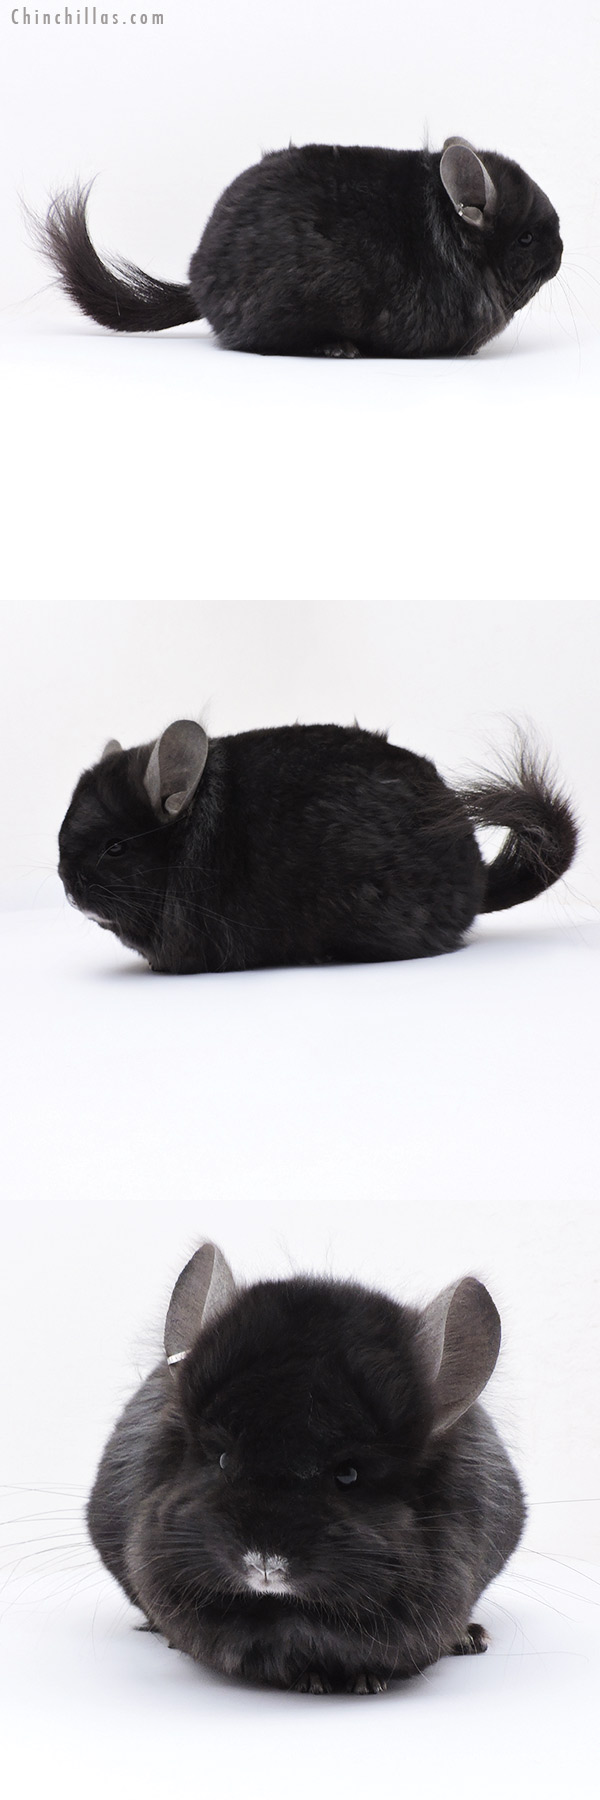 Chinchilla or related item offered for sale or export on Chinchillas.com - 18069 Exceptional Blocky  Royal Imperial Angora Male Chinchilla with Lion Mane